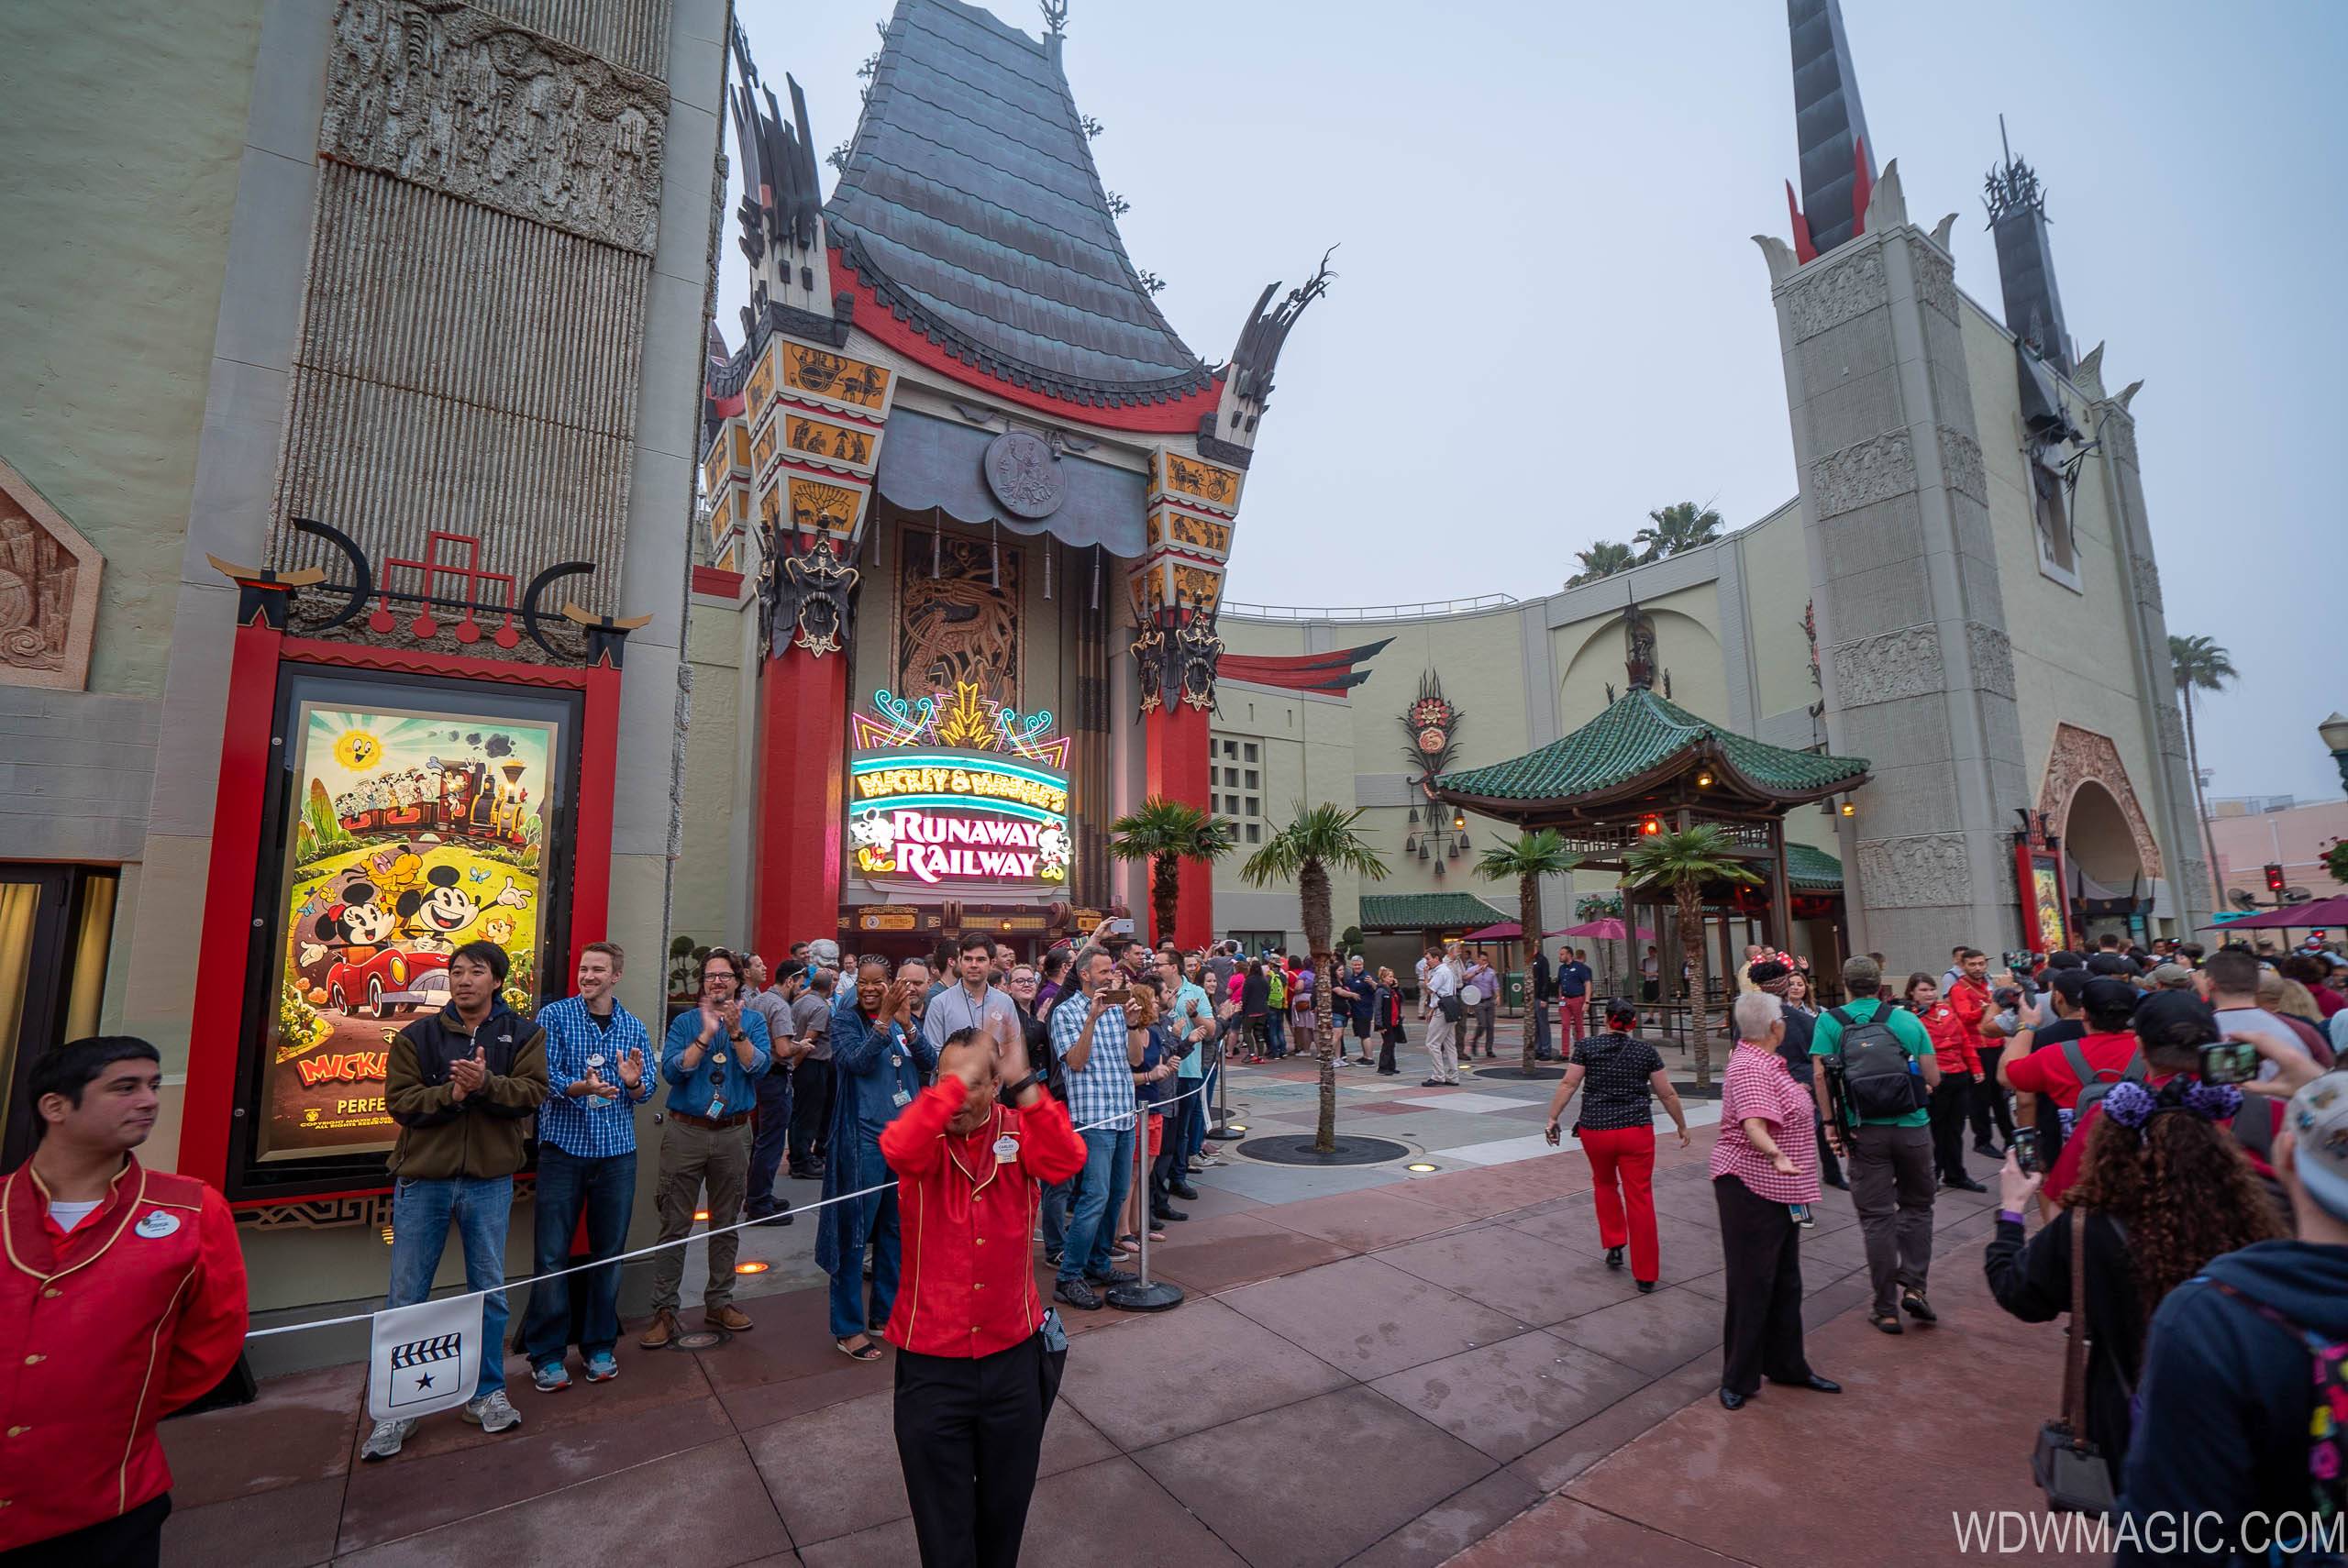 PHOTOS - Crowds pack into Disney's Hollywood Studios for the opening of Mickey and Minnie's Runaway Railway